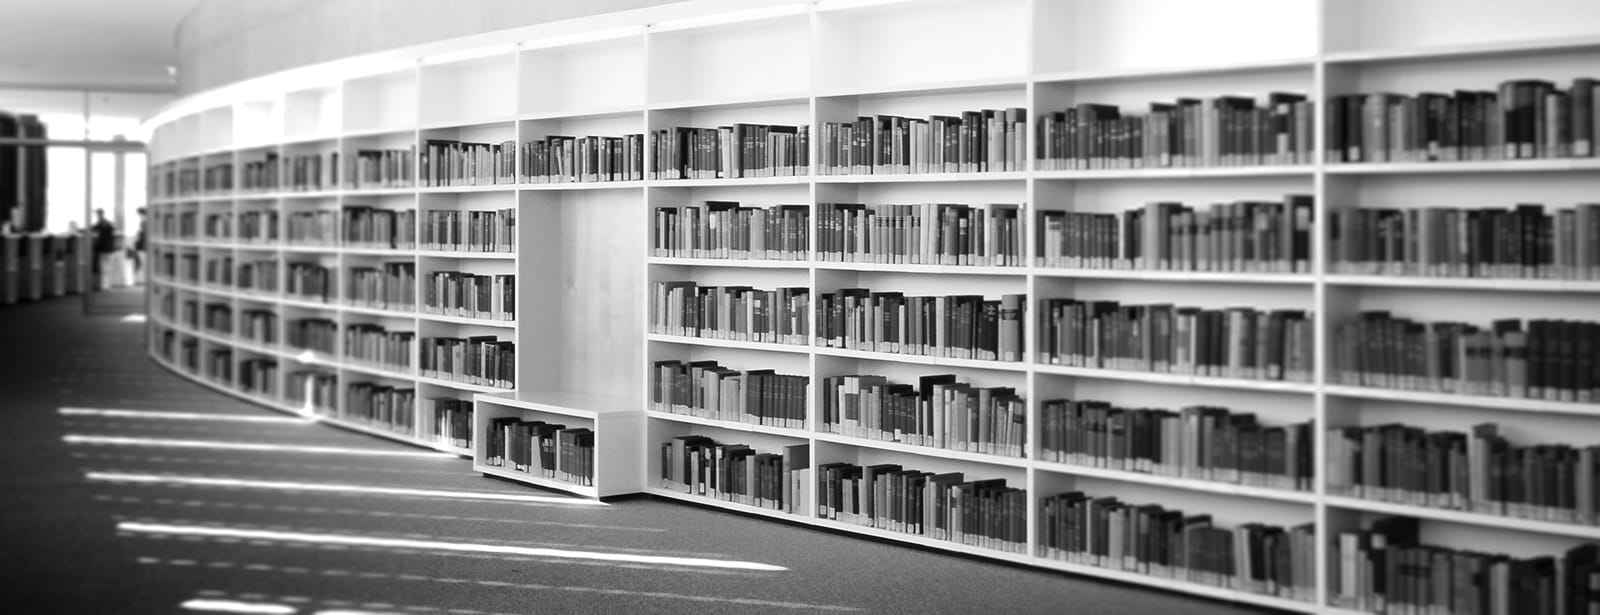 Grayscale photo of a curved hallway in a library